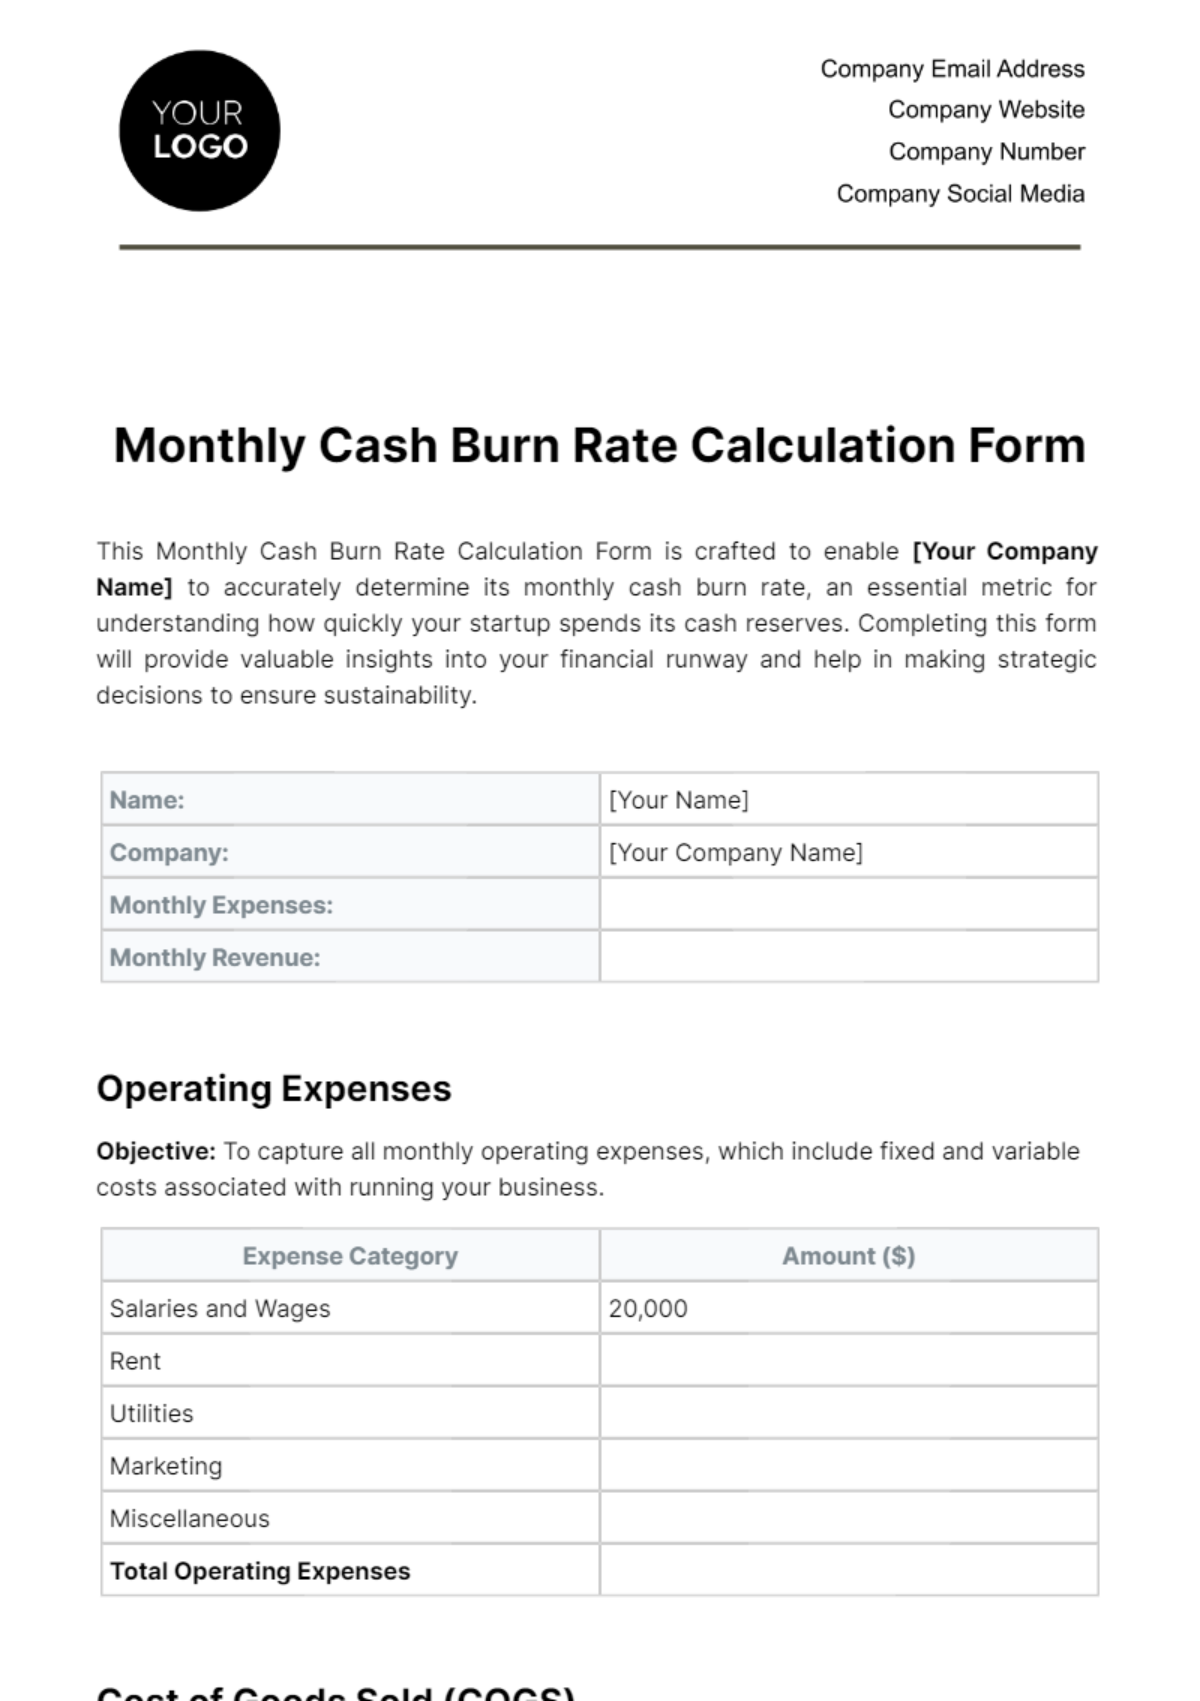 Monthly Cash Burn Rate Calculation Form